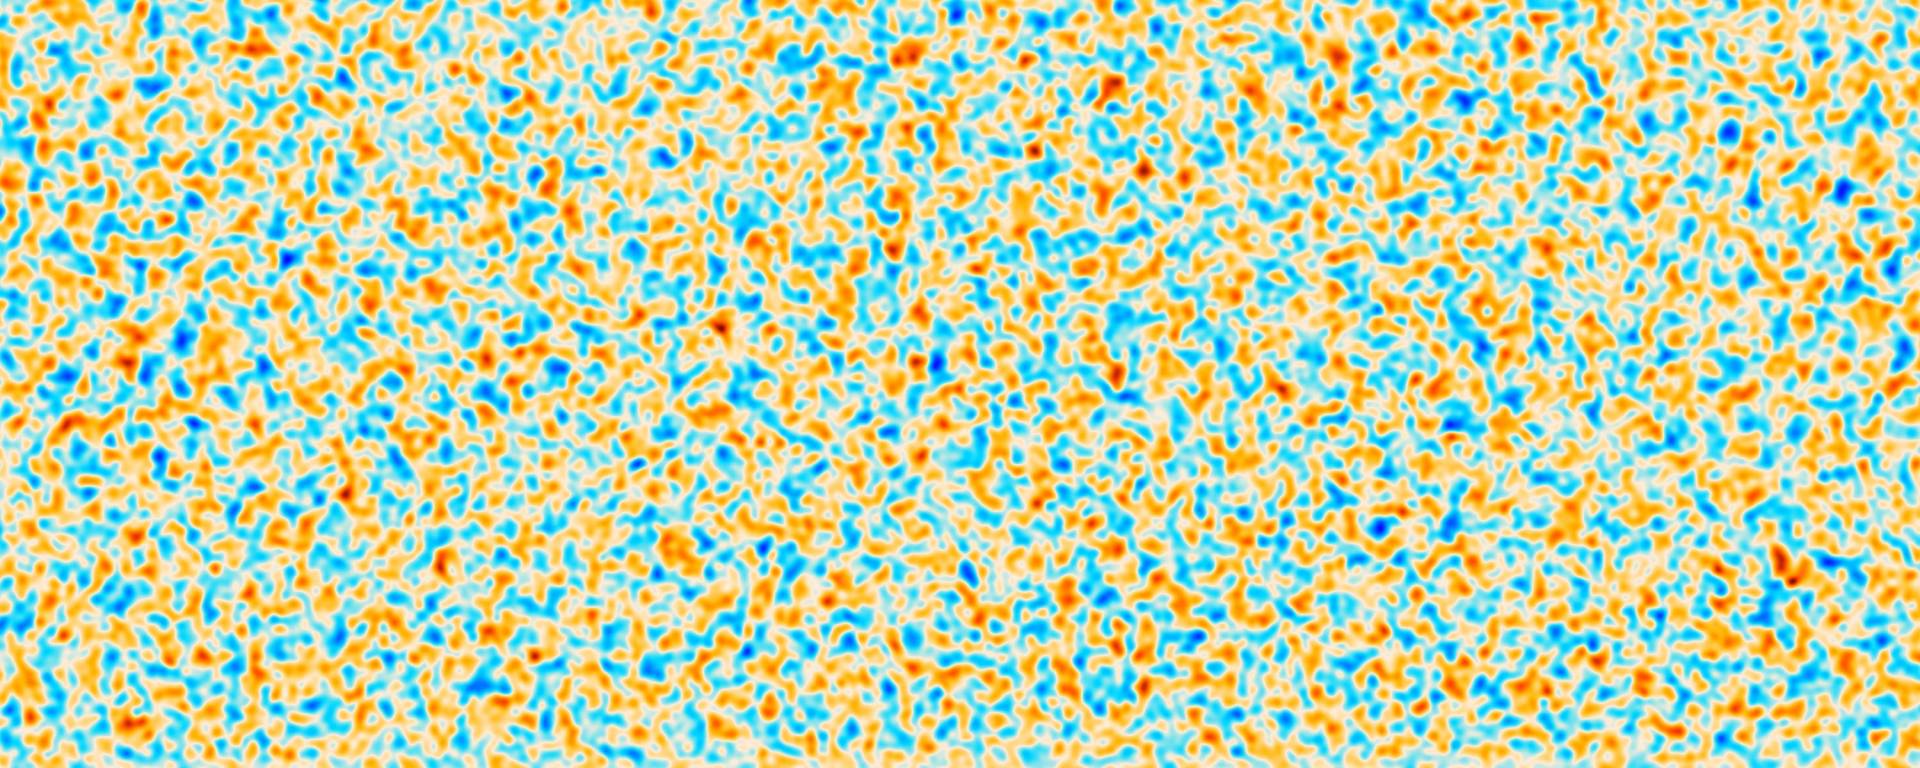 Cosmic microwave background as colored dots